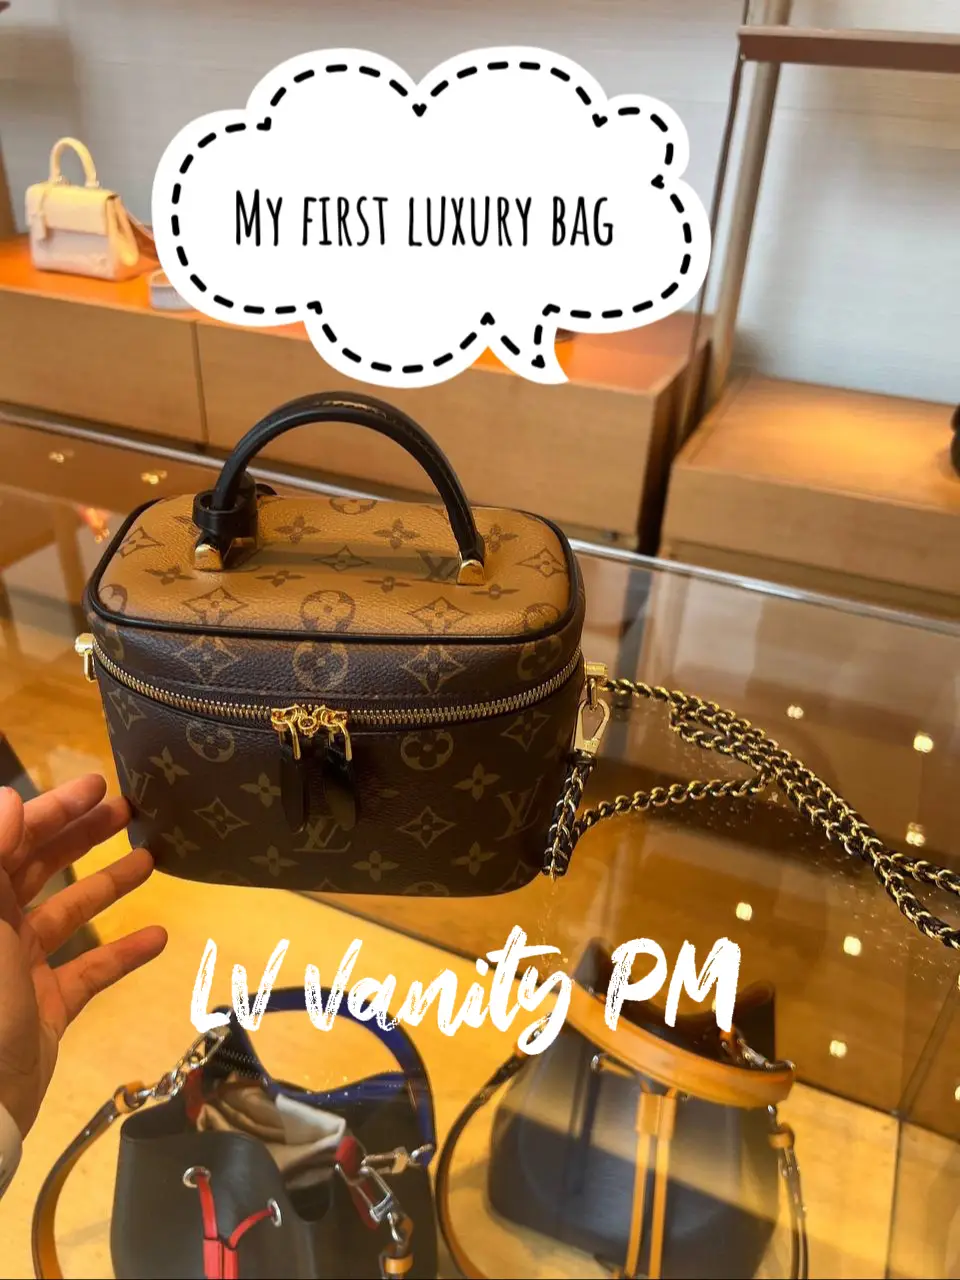 Luxury Handbag Regret?? Things I Don't Like About My Louis Vuitton